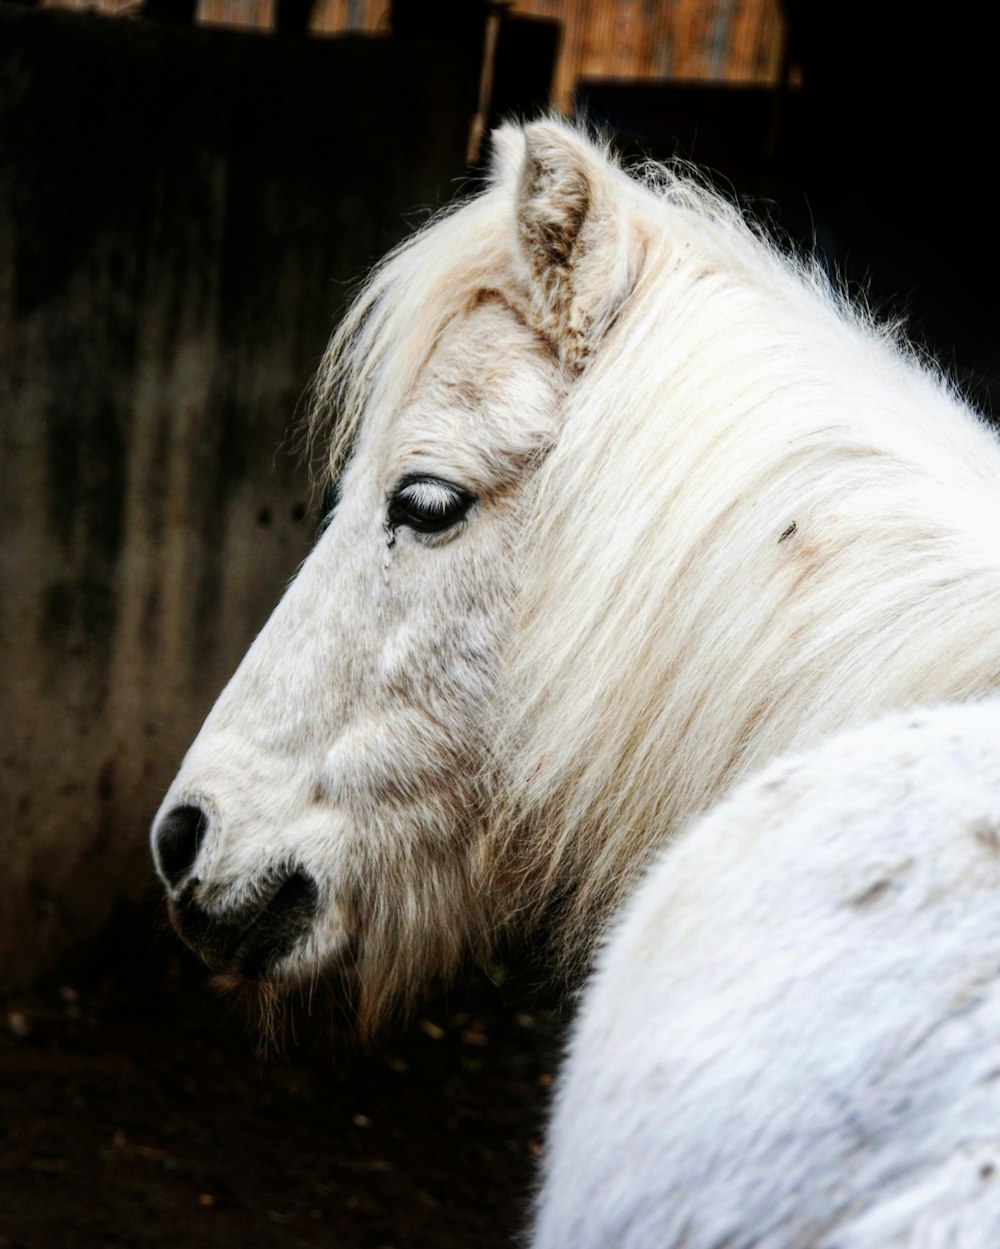 white horse in close up photography